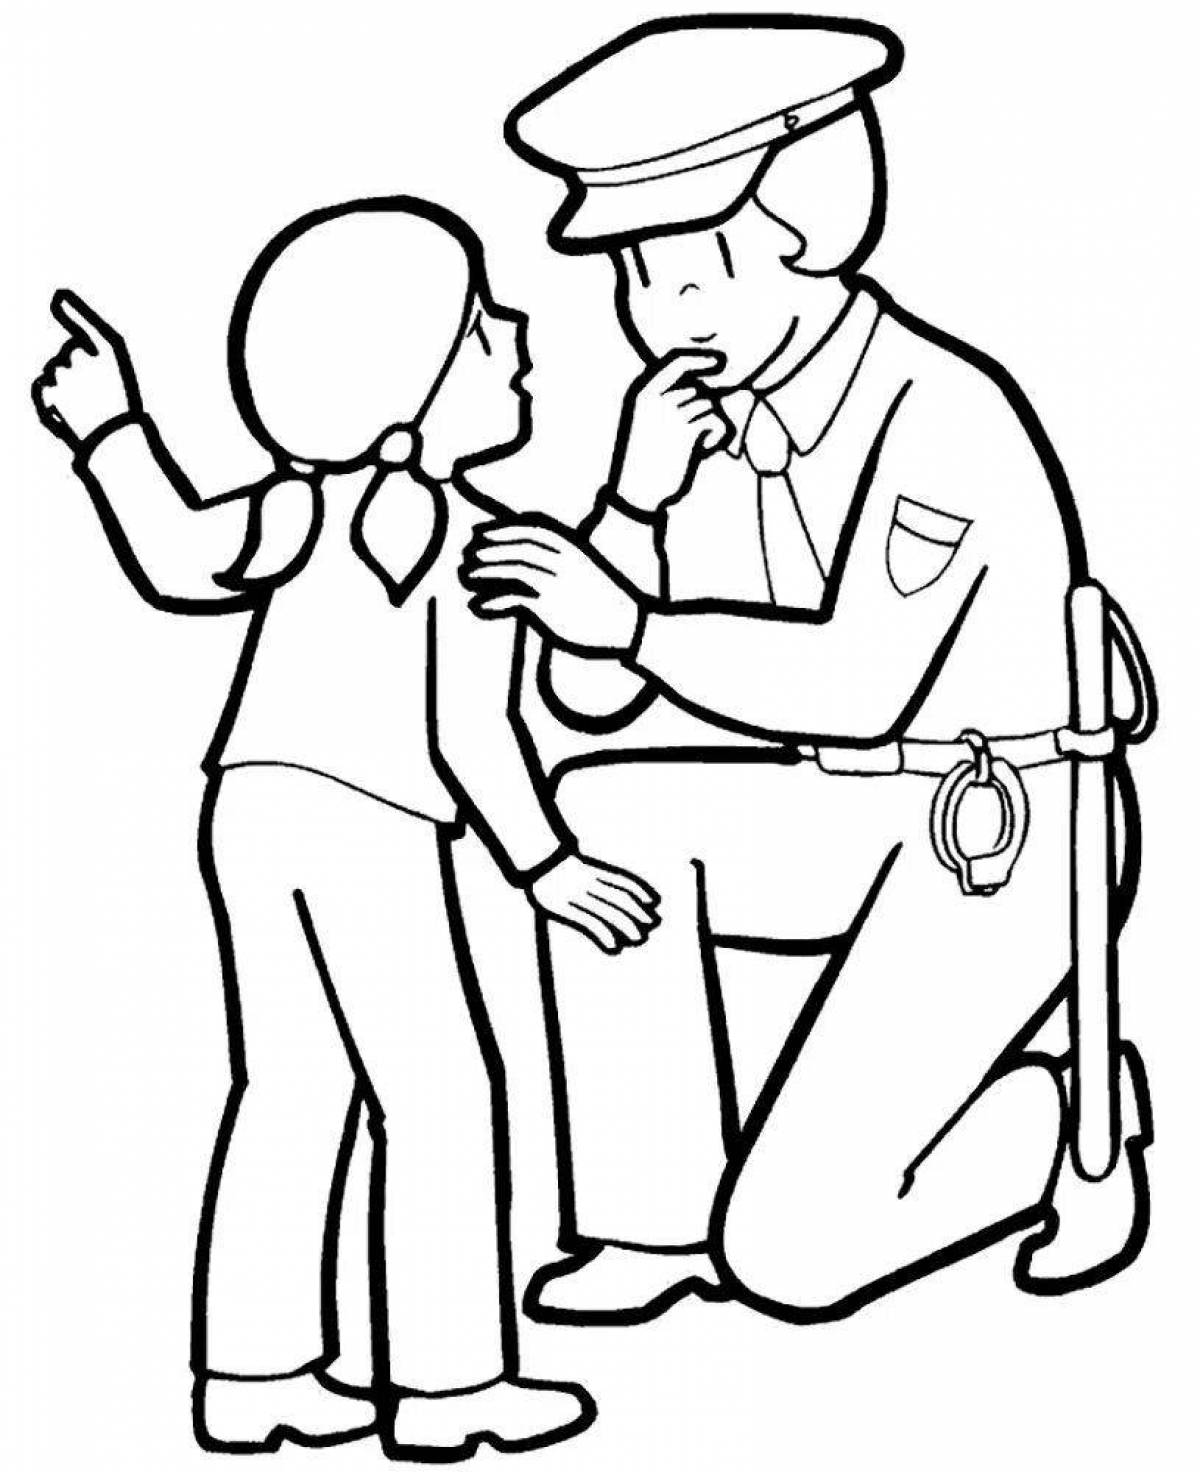 Ambitious cop coloring book